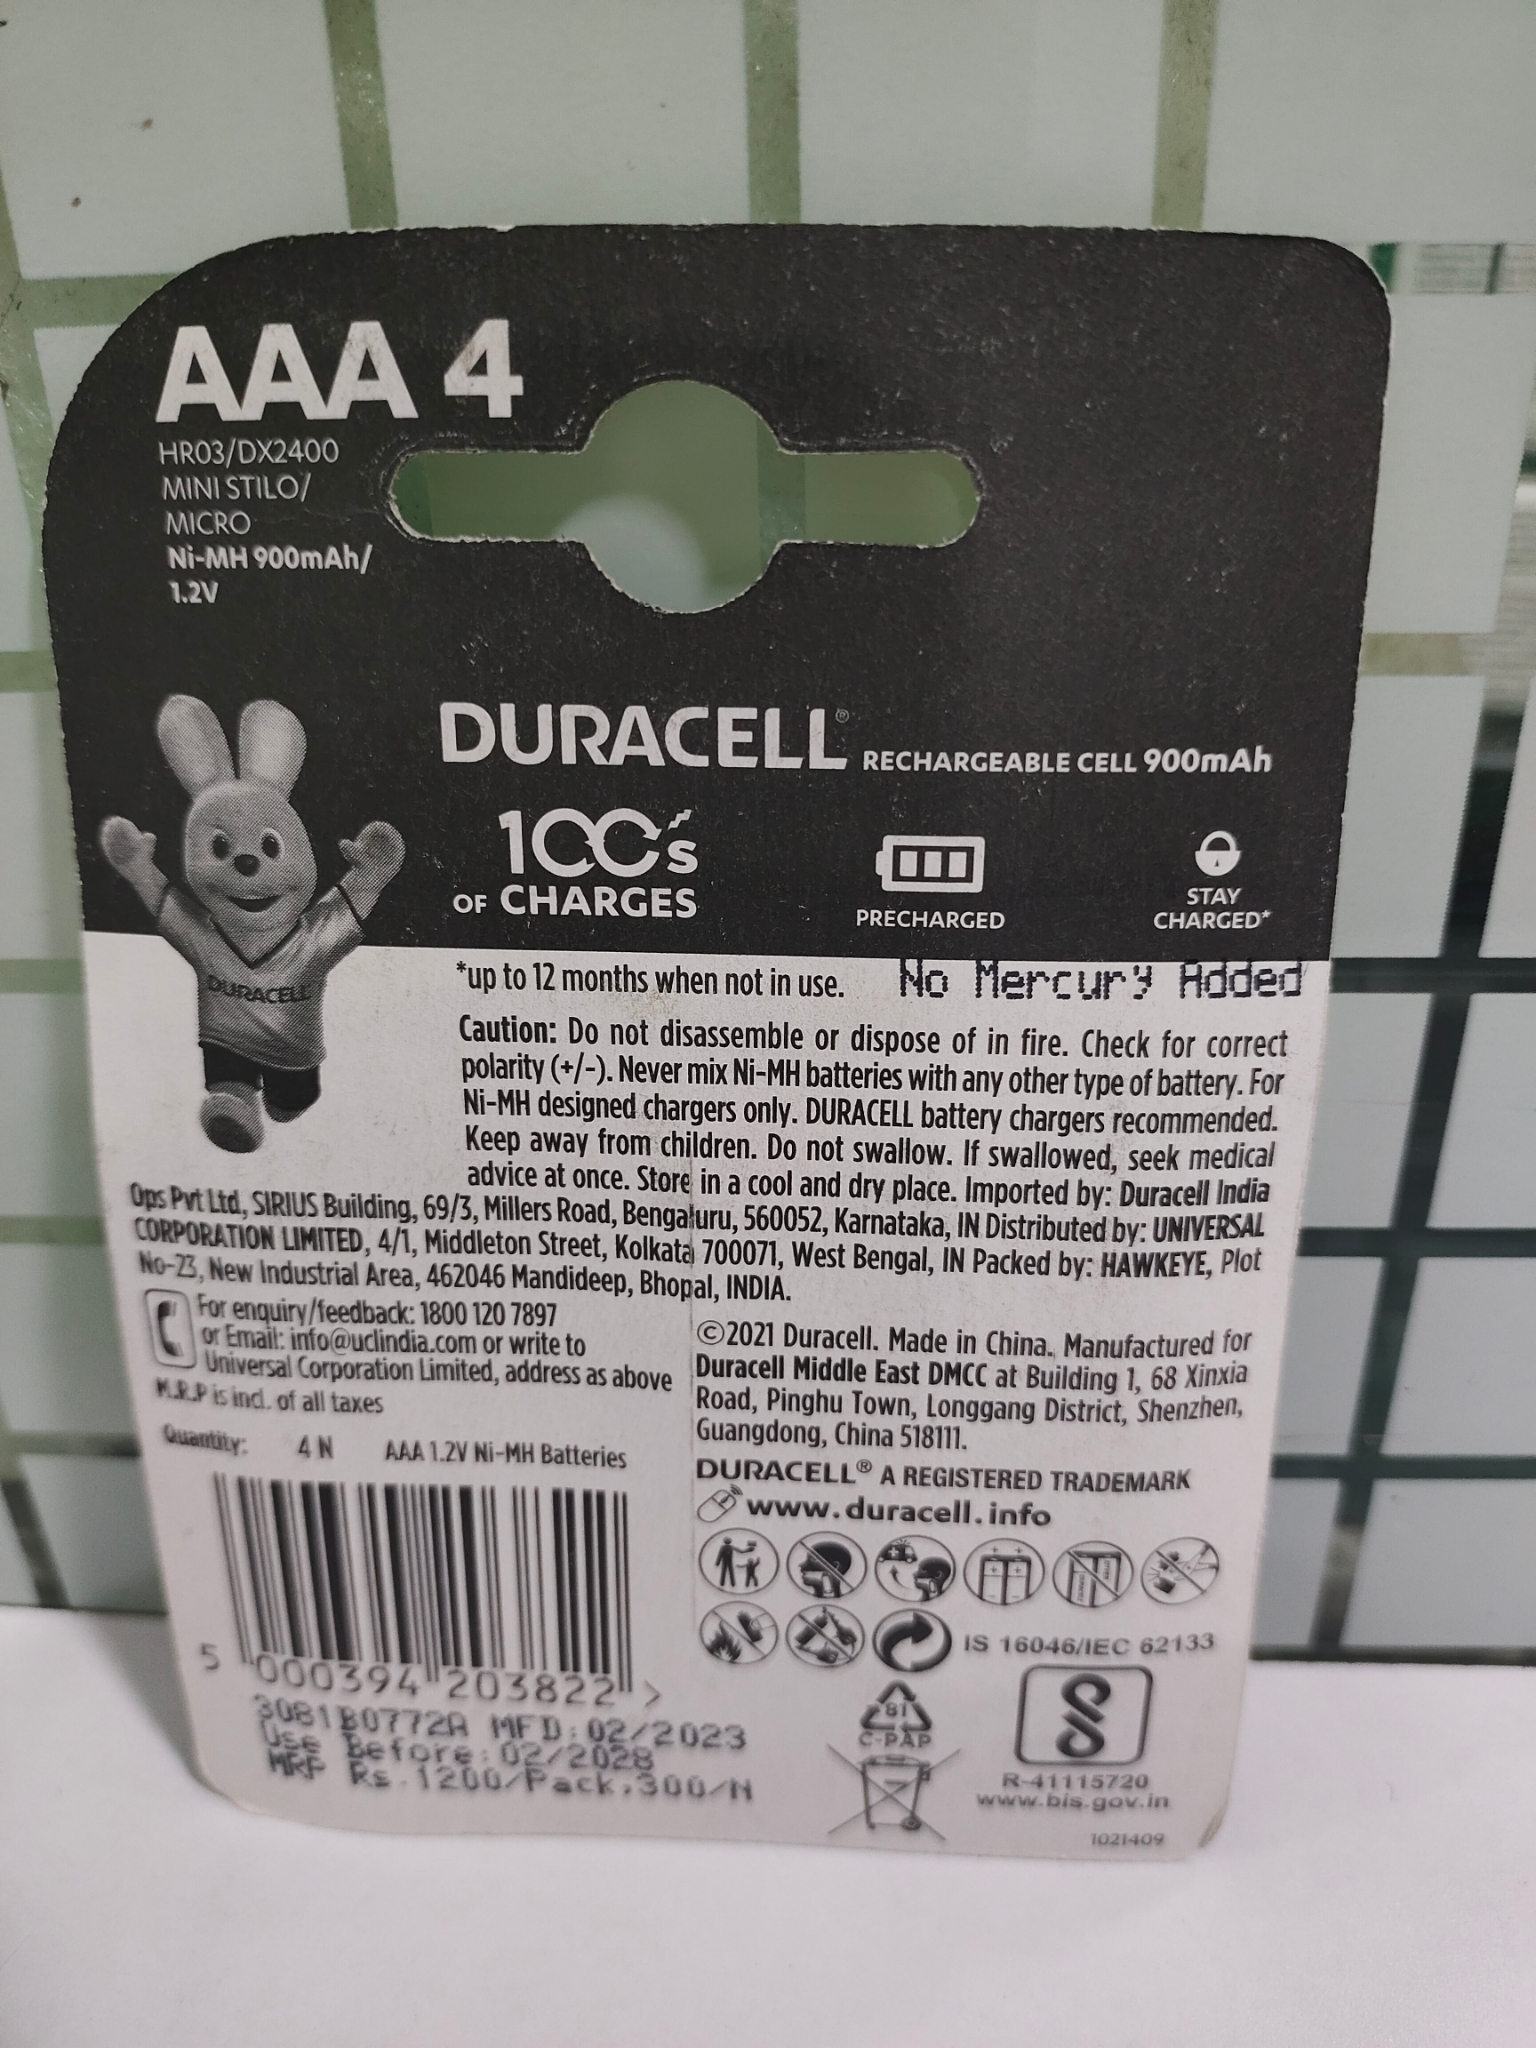 Duracell Recharge Ultra AAA 900 mAh (par 4) - Pile & chargeur - LDLC